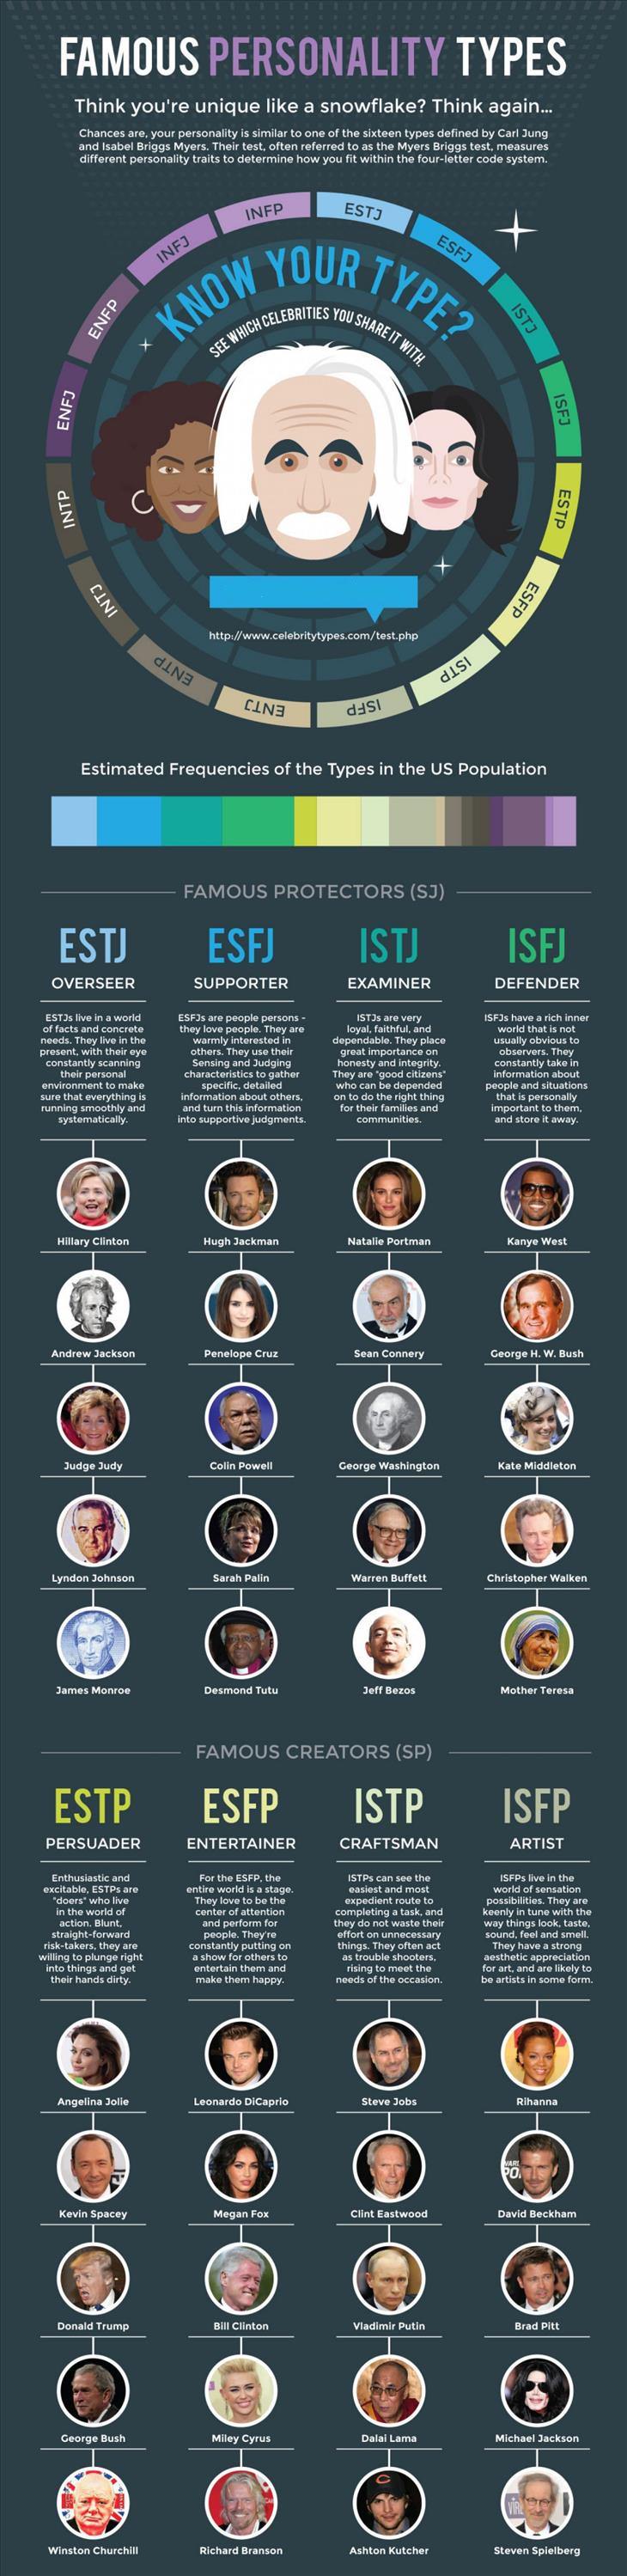 personality types famous people infographic